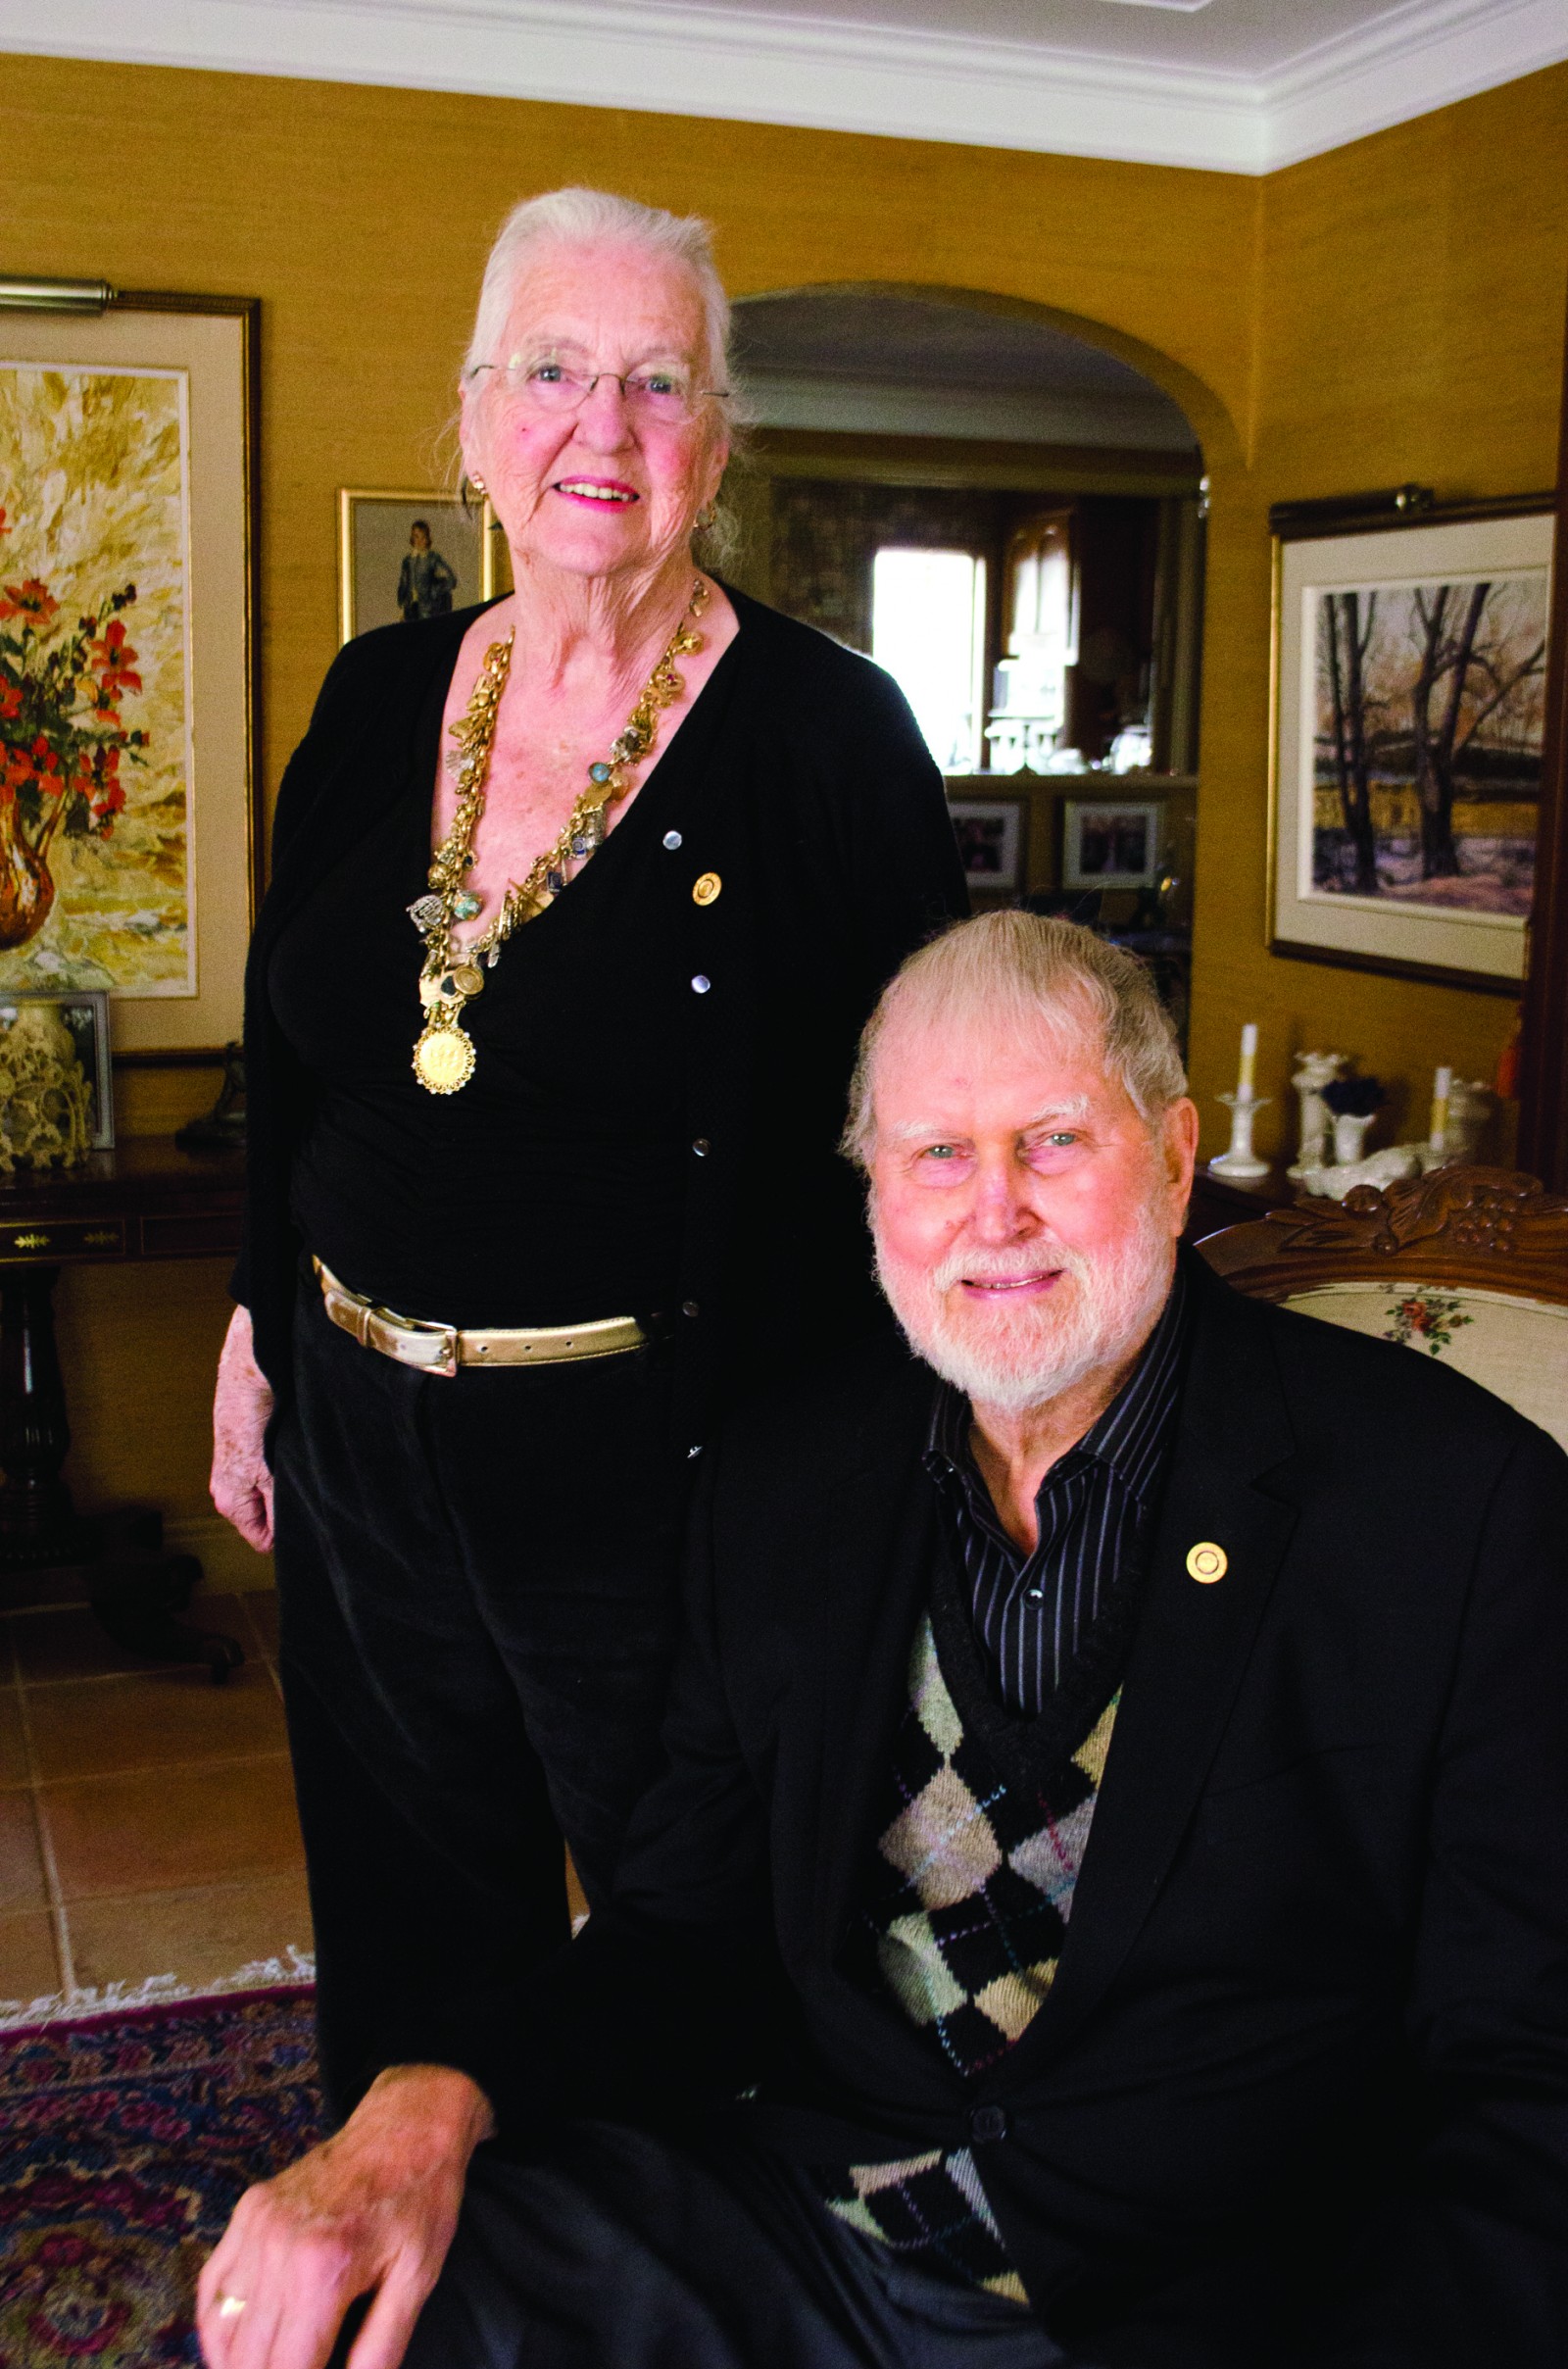 Val and Art Fleming in their home in Beamsville. Val stands next to Art, who is sitting. (photo supplied by Grimsby Lincoln News/Niagara this Week)